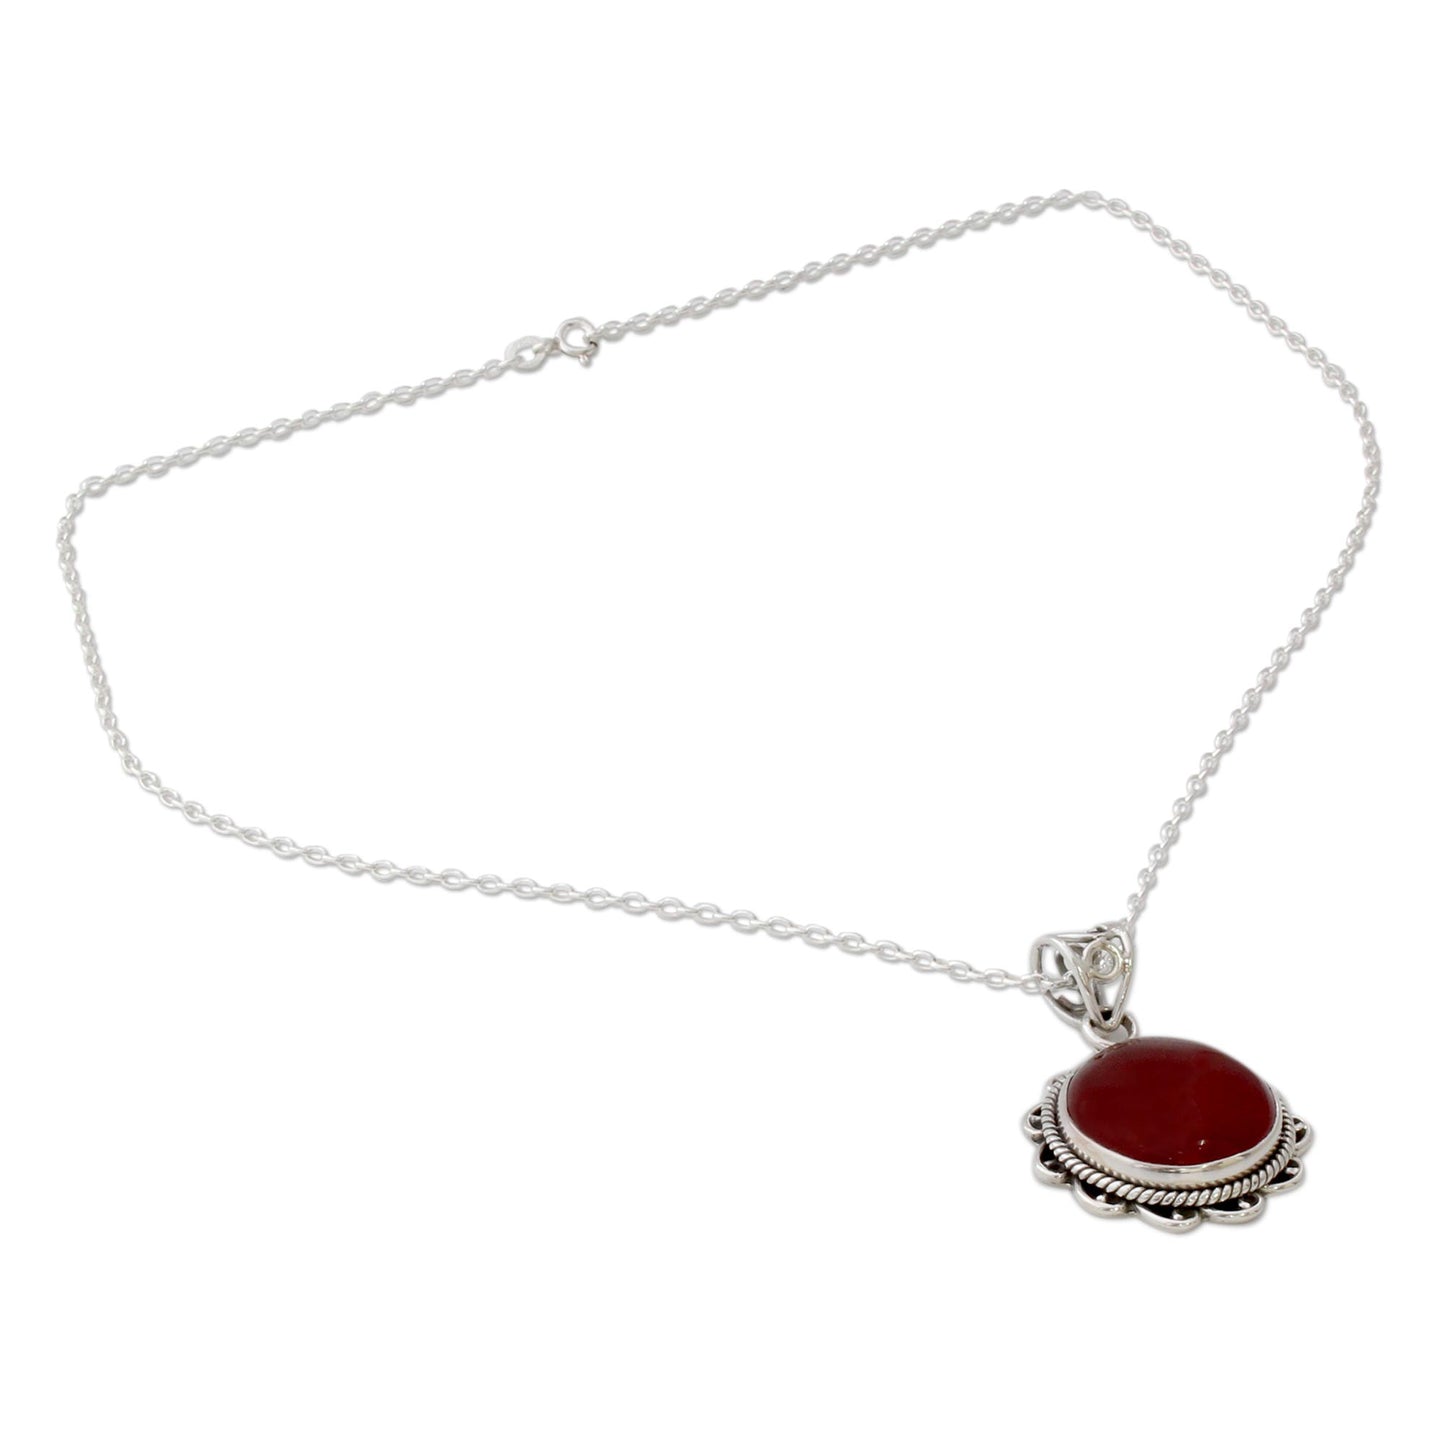 Burst of Passion Indian Handcrafted Sterling Silver and Carnelian Necklace